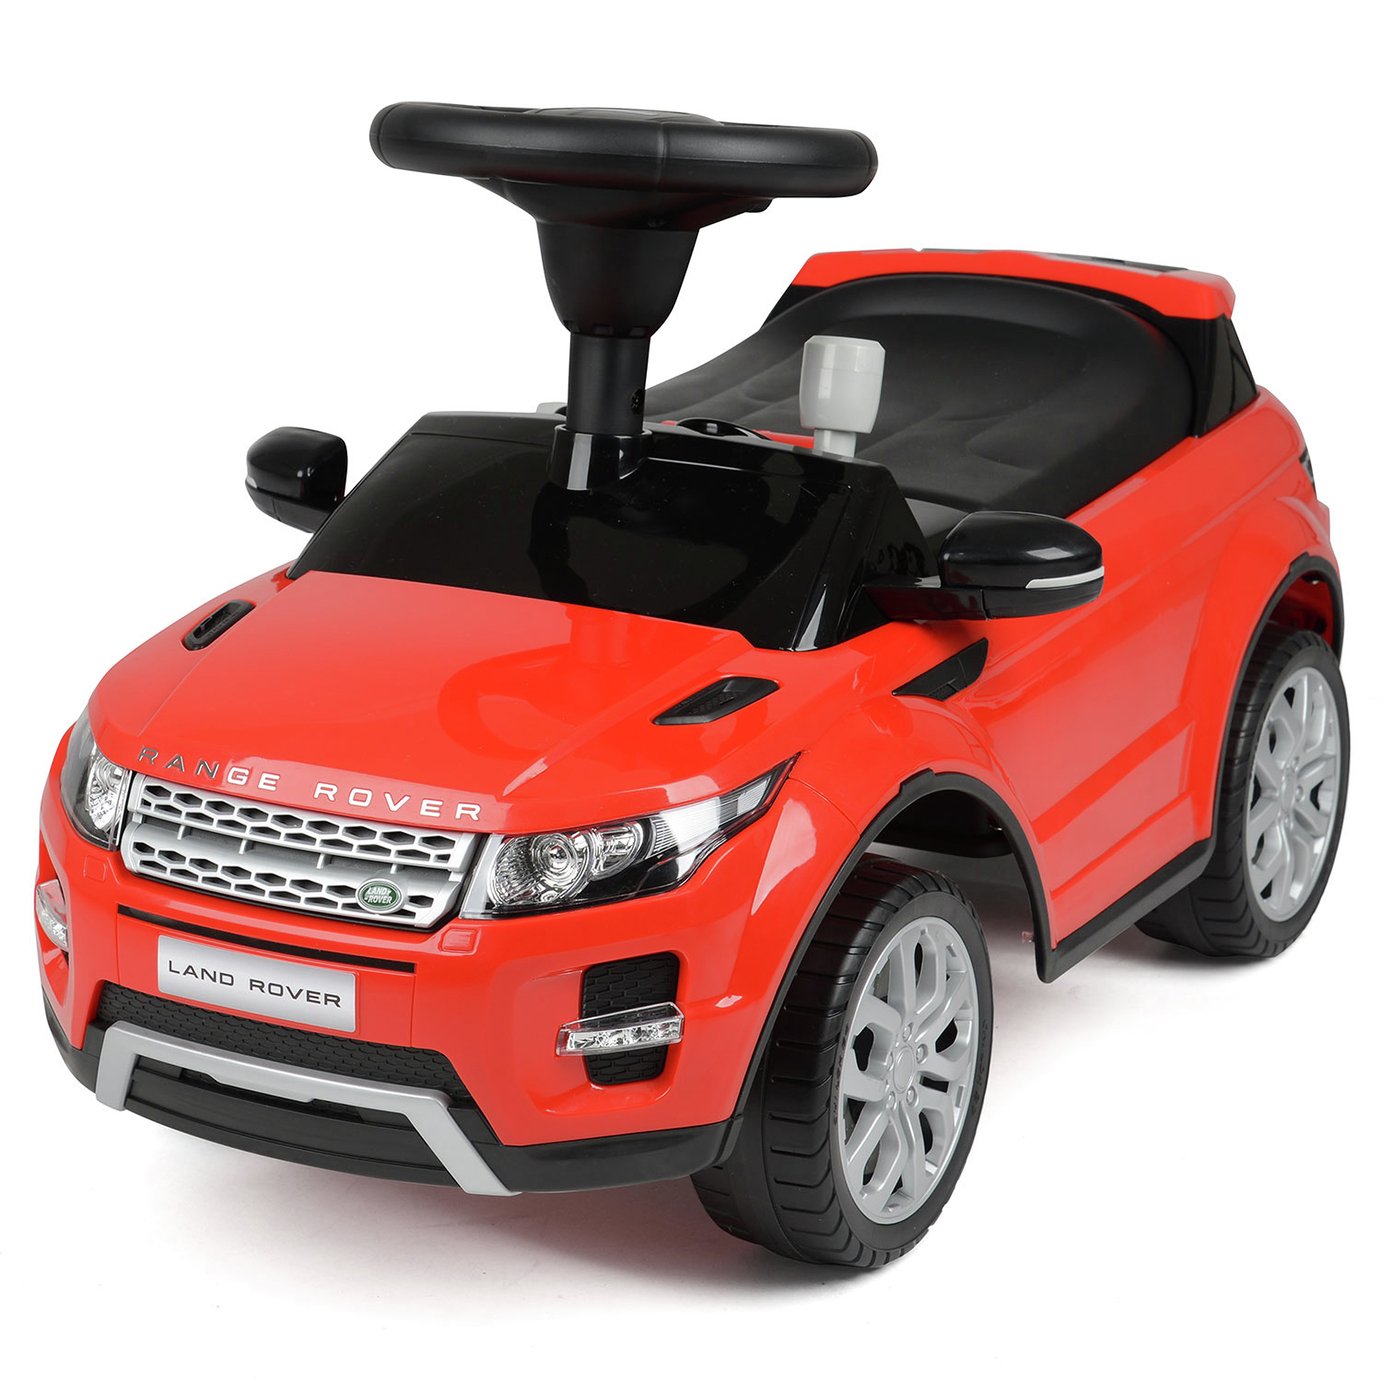 Sit N Go Red Range Rover Review